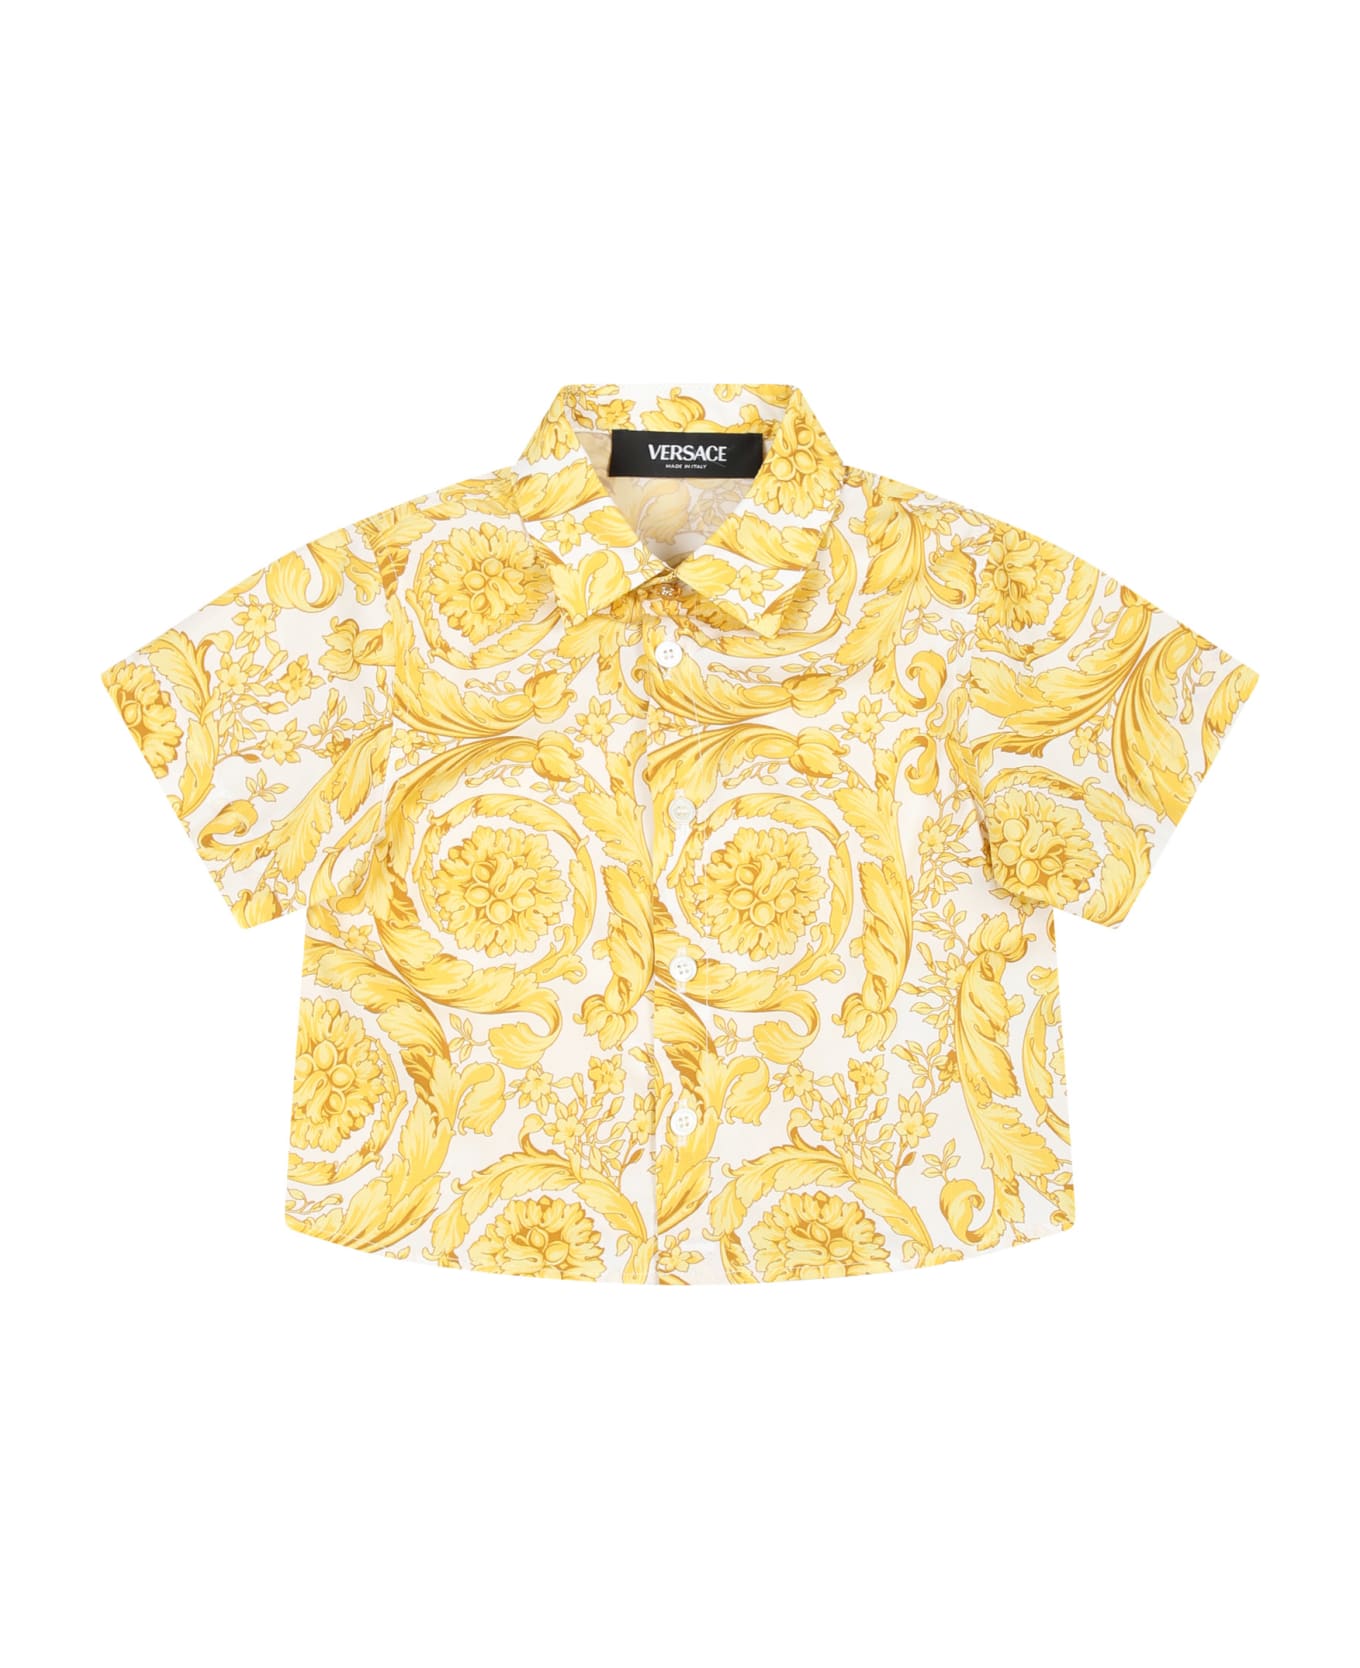 Versace White Shirt For Baby Boy With Baroque Print - White シャツ